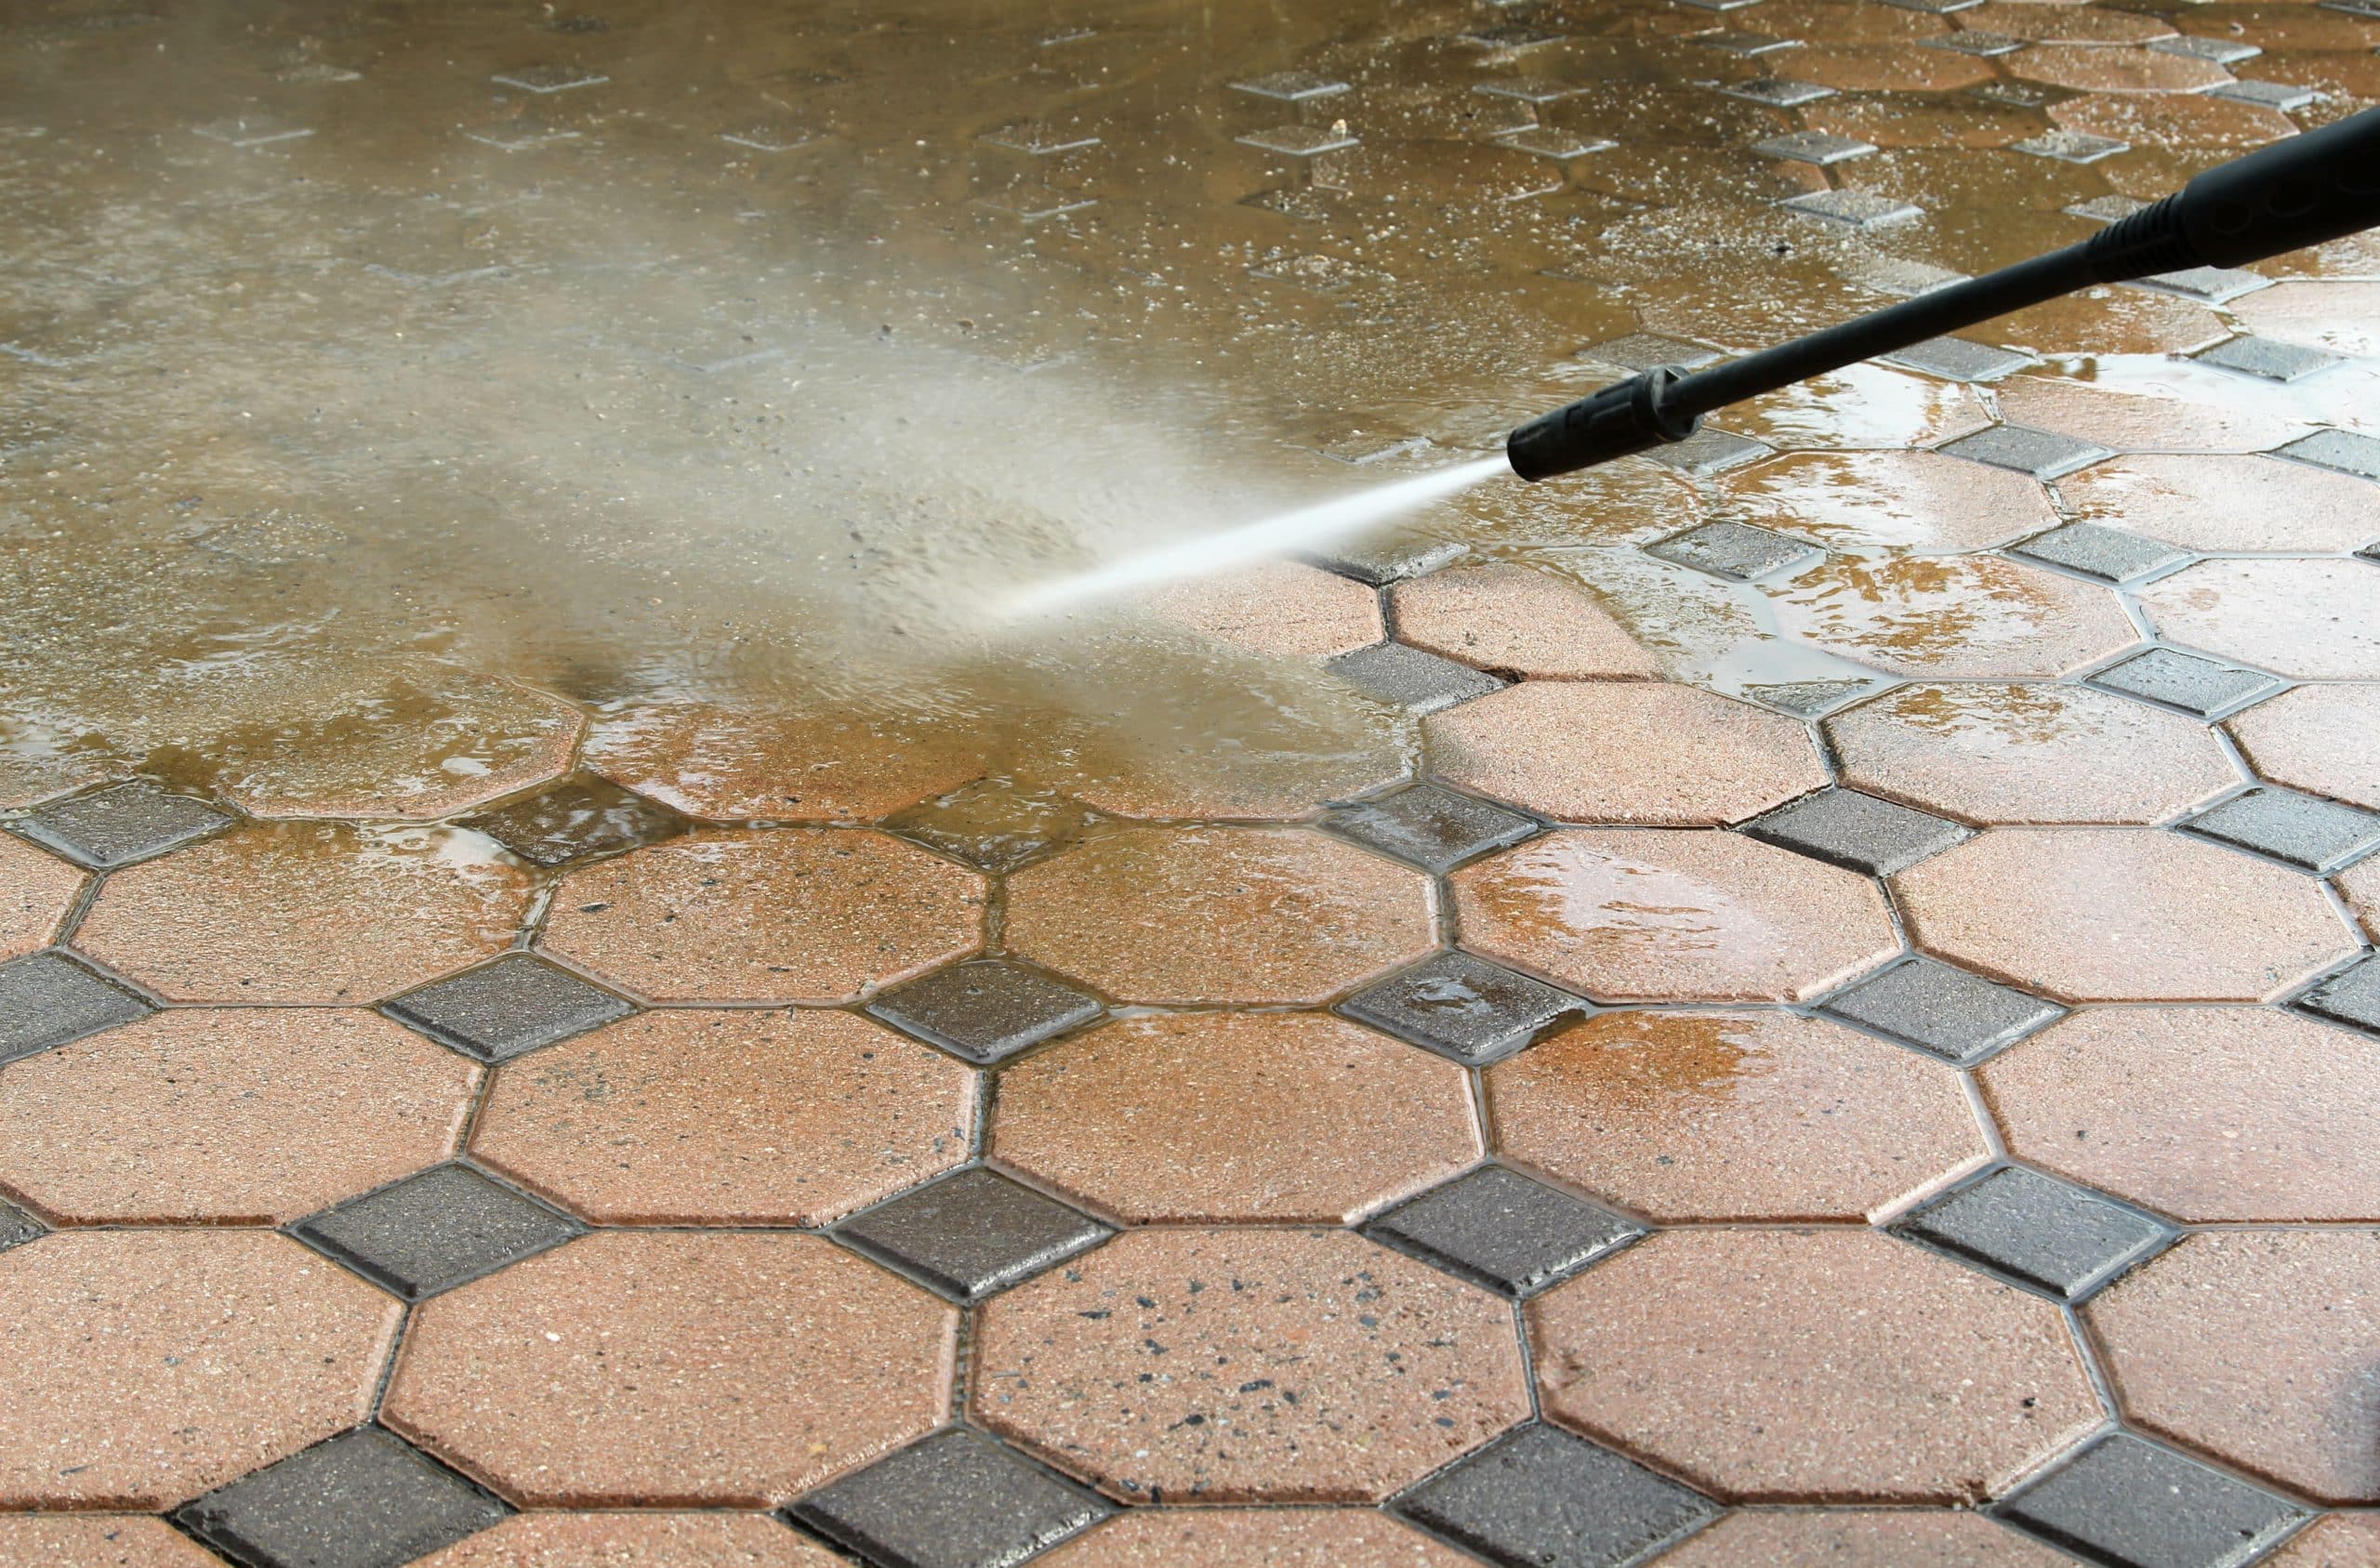 Professional Paver Cleaners